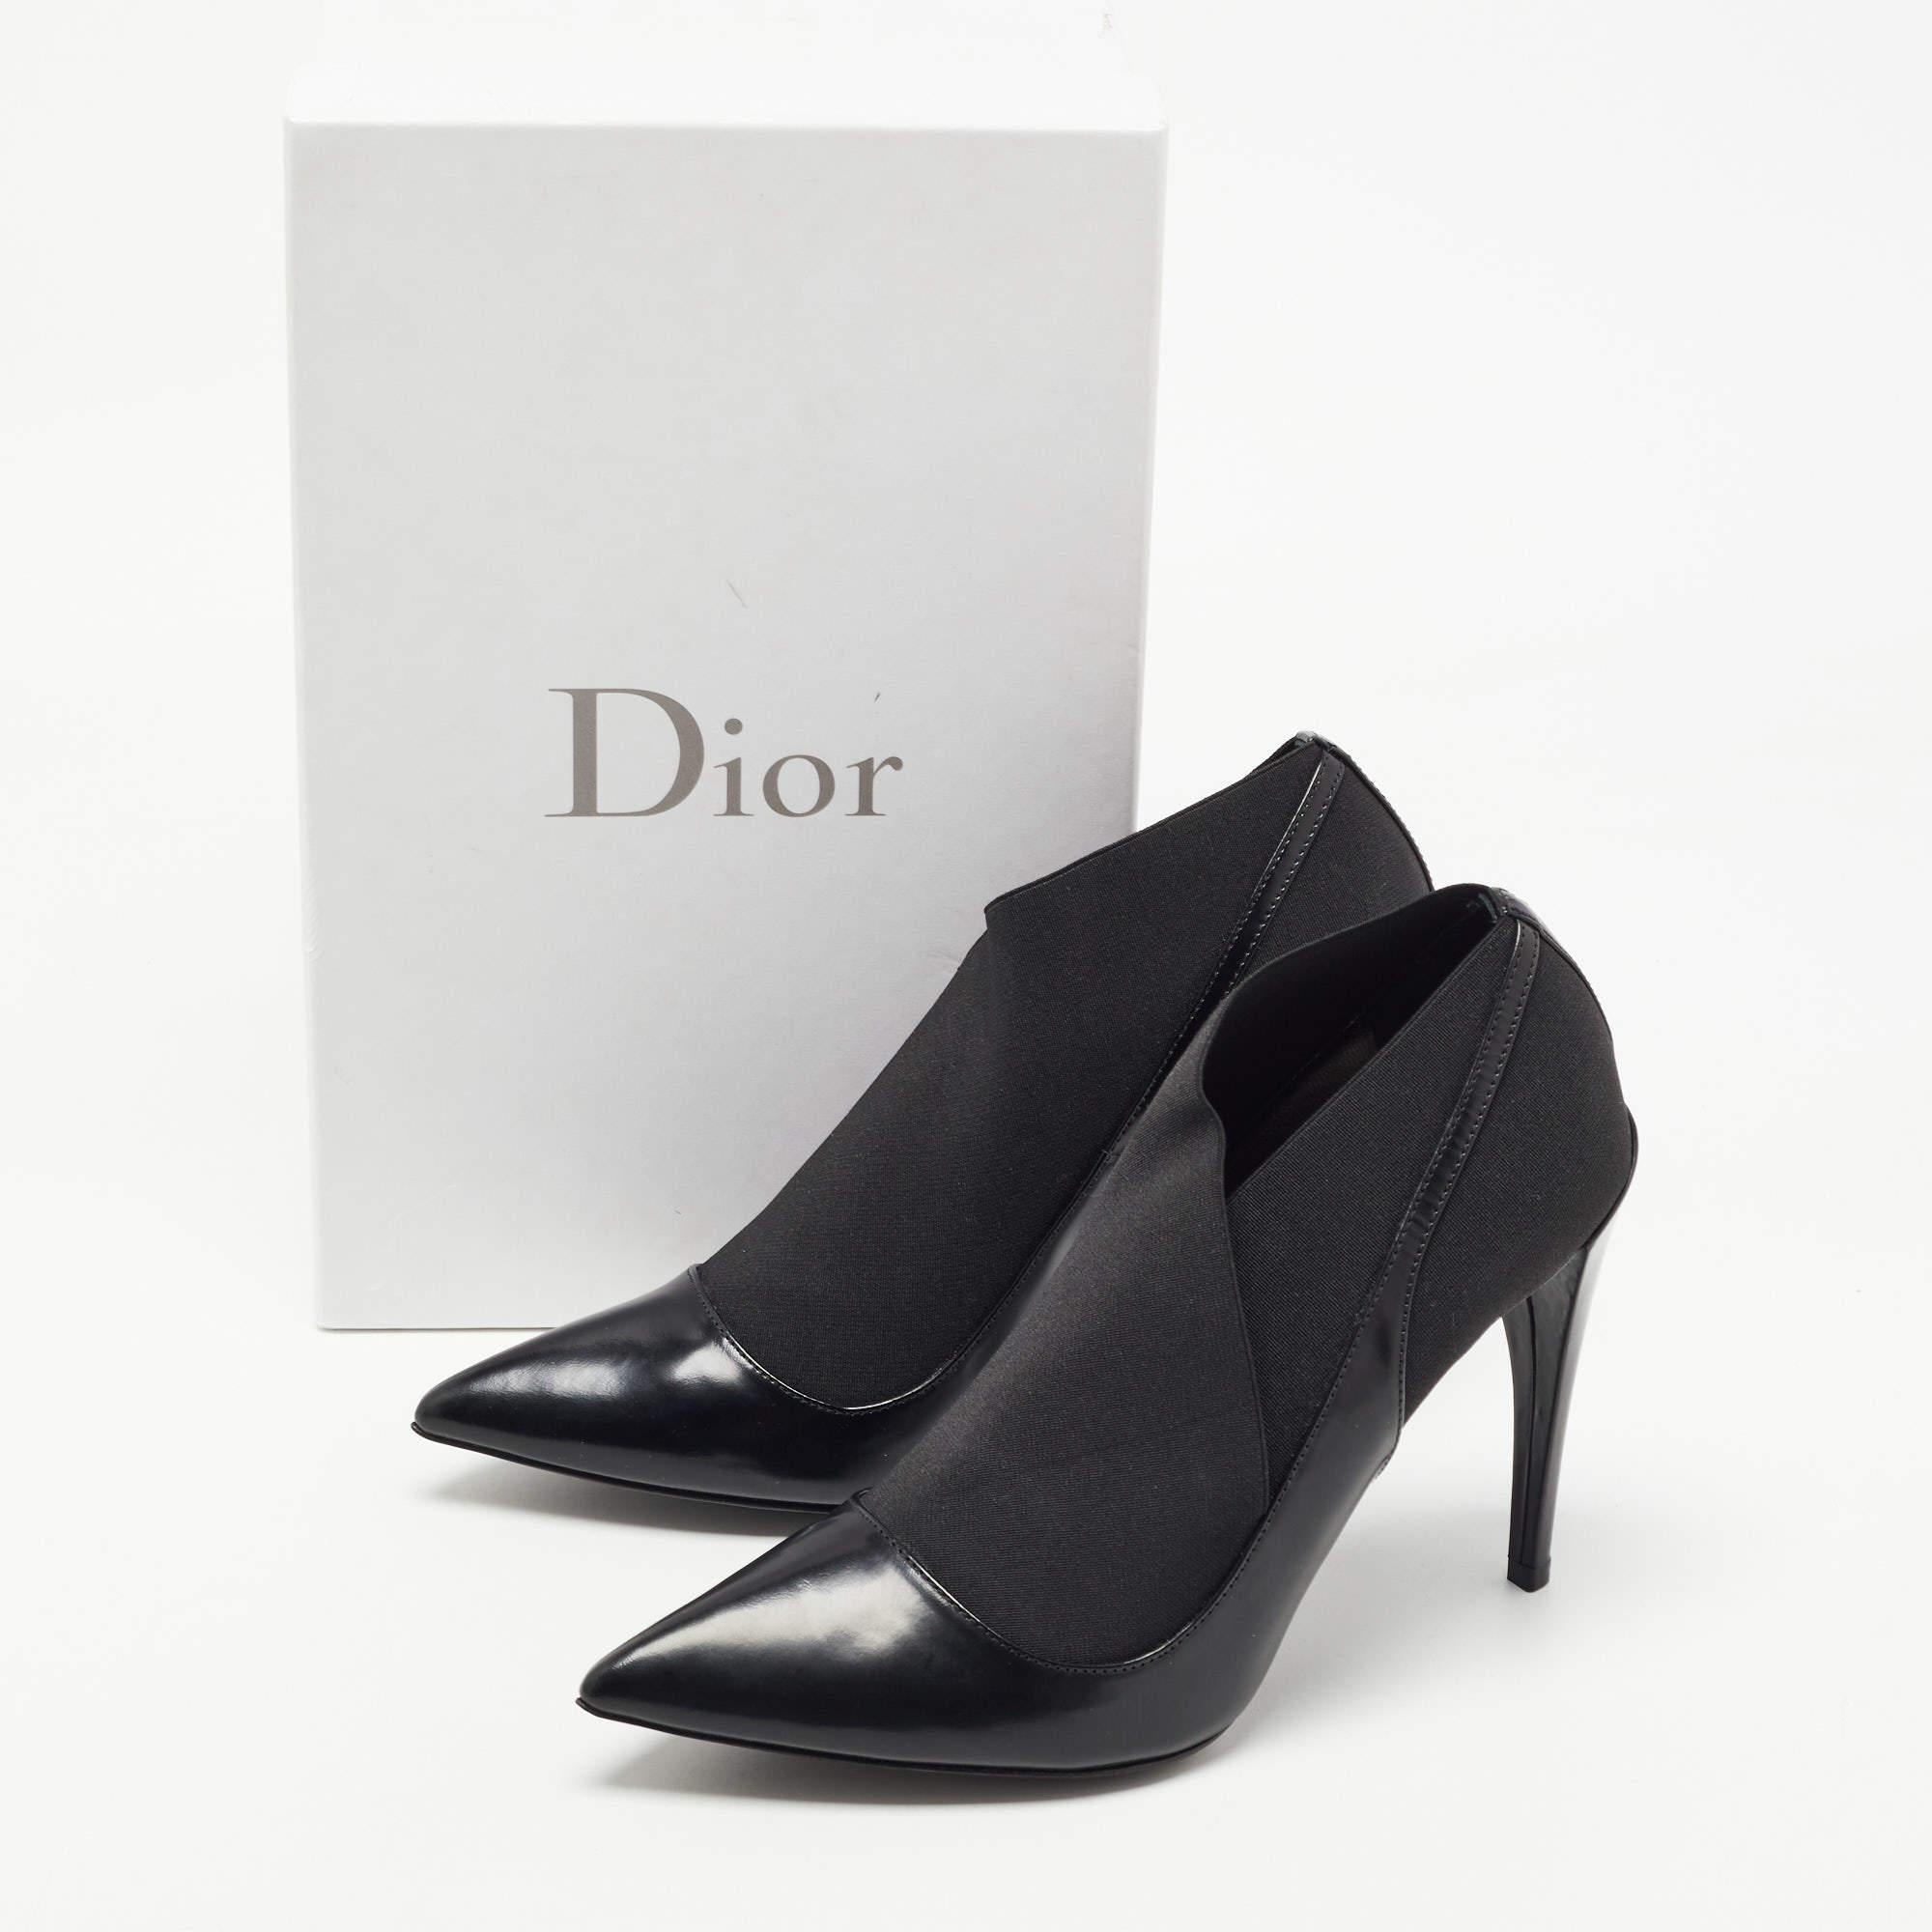 Dior Black Leather and Fabric Kitten Heel Pumps Size 39 2